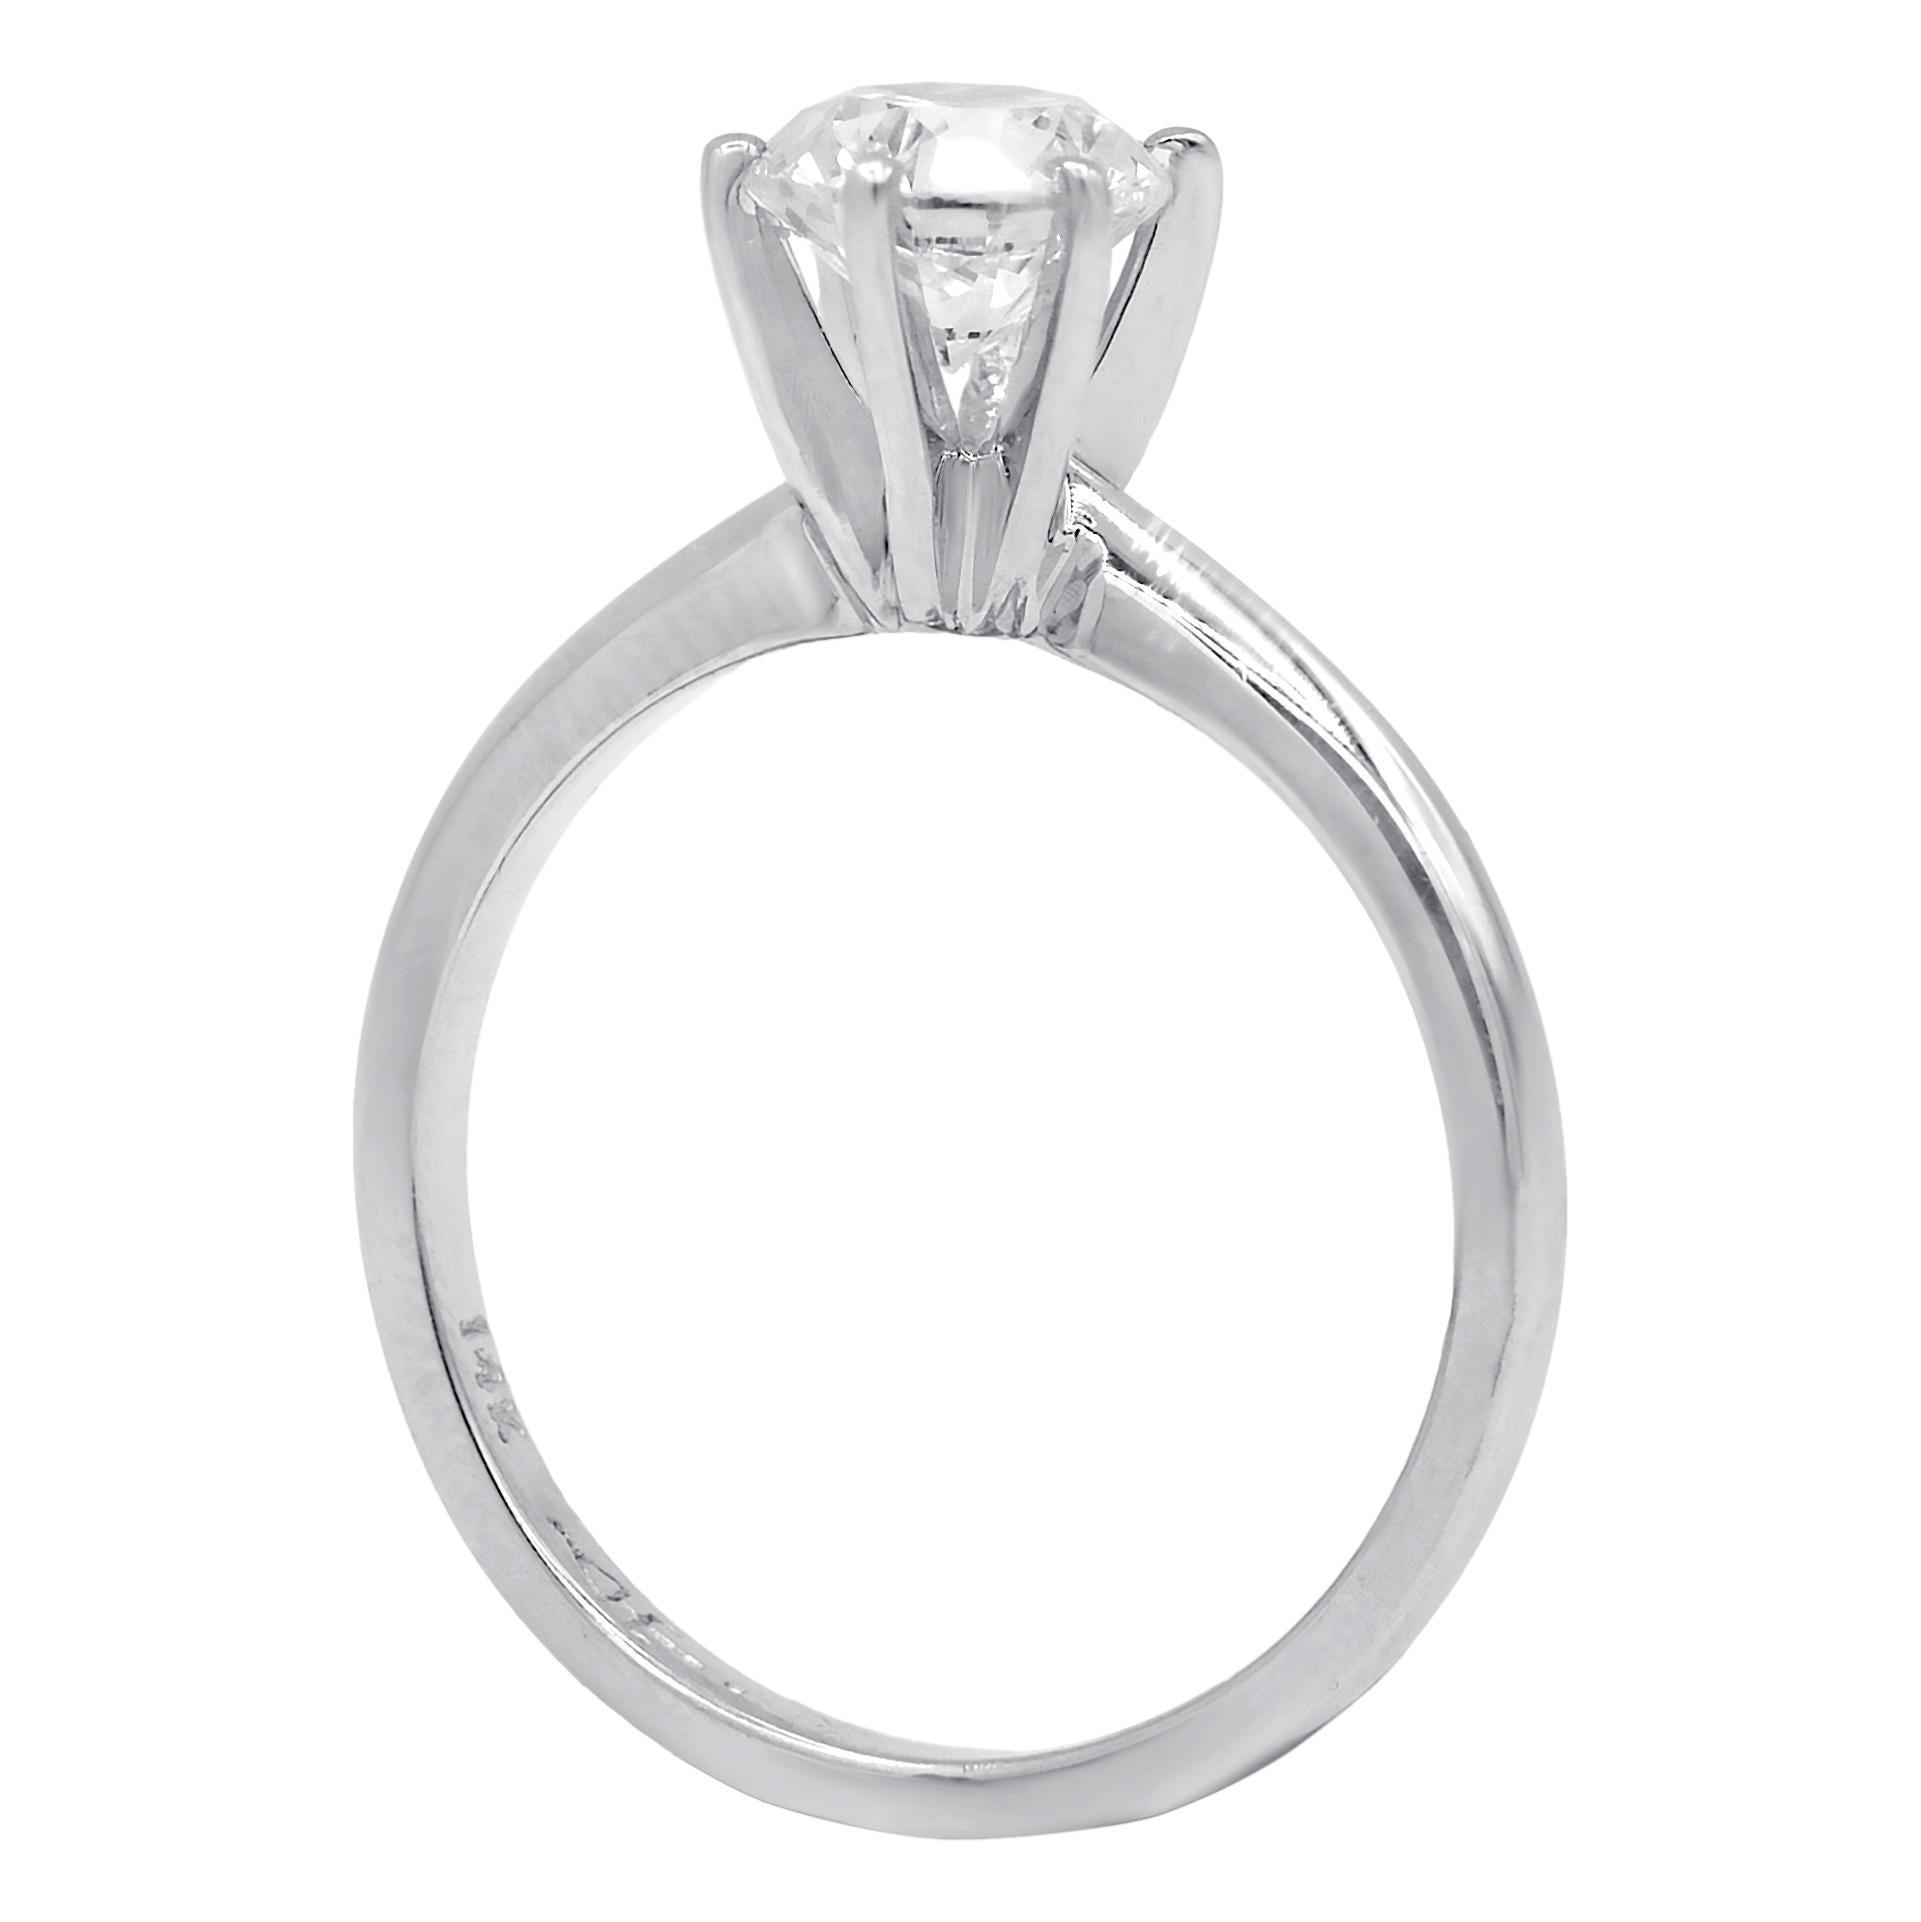 Timeless Platinum Diamond Engagement ring, features 1.05 Carats GIA Certified Diamonds
D color VVS2 in clarity
Comes with GIA report
The center diamond can be sold separately


